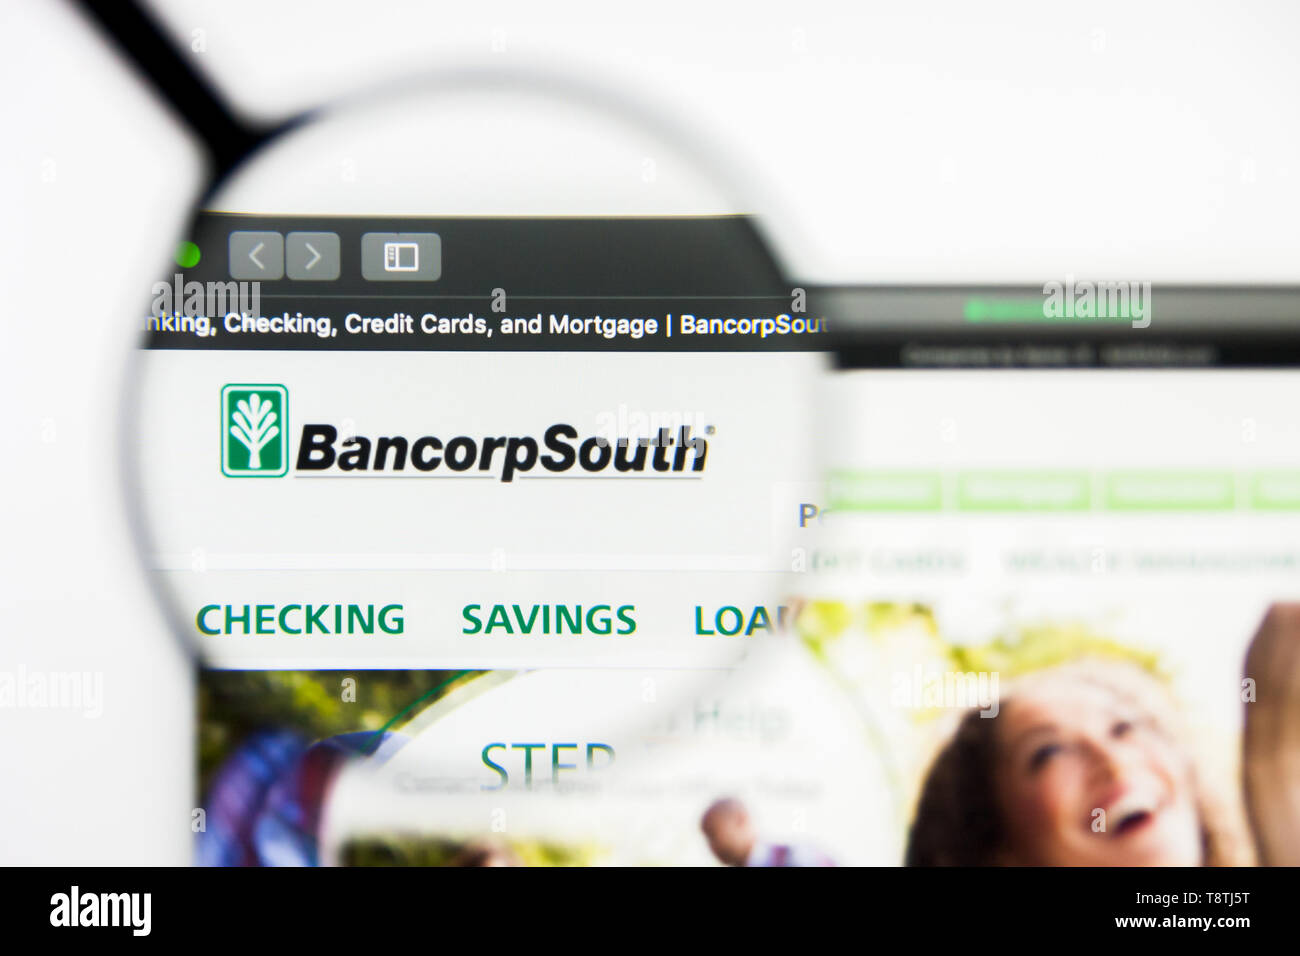 Bancorpsouth High Resolution Stock Photography and Images - Alamy